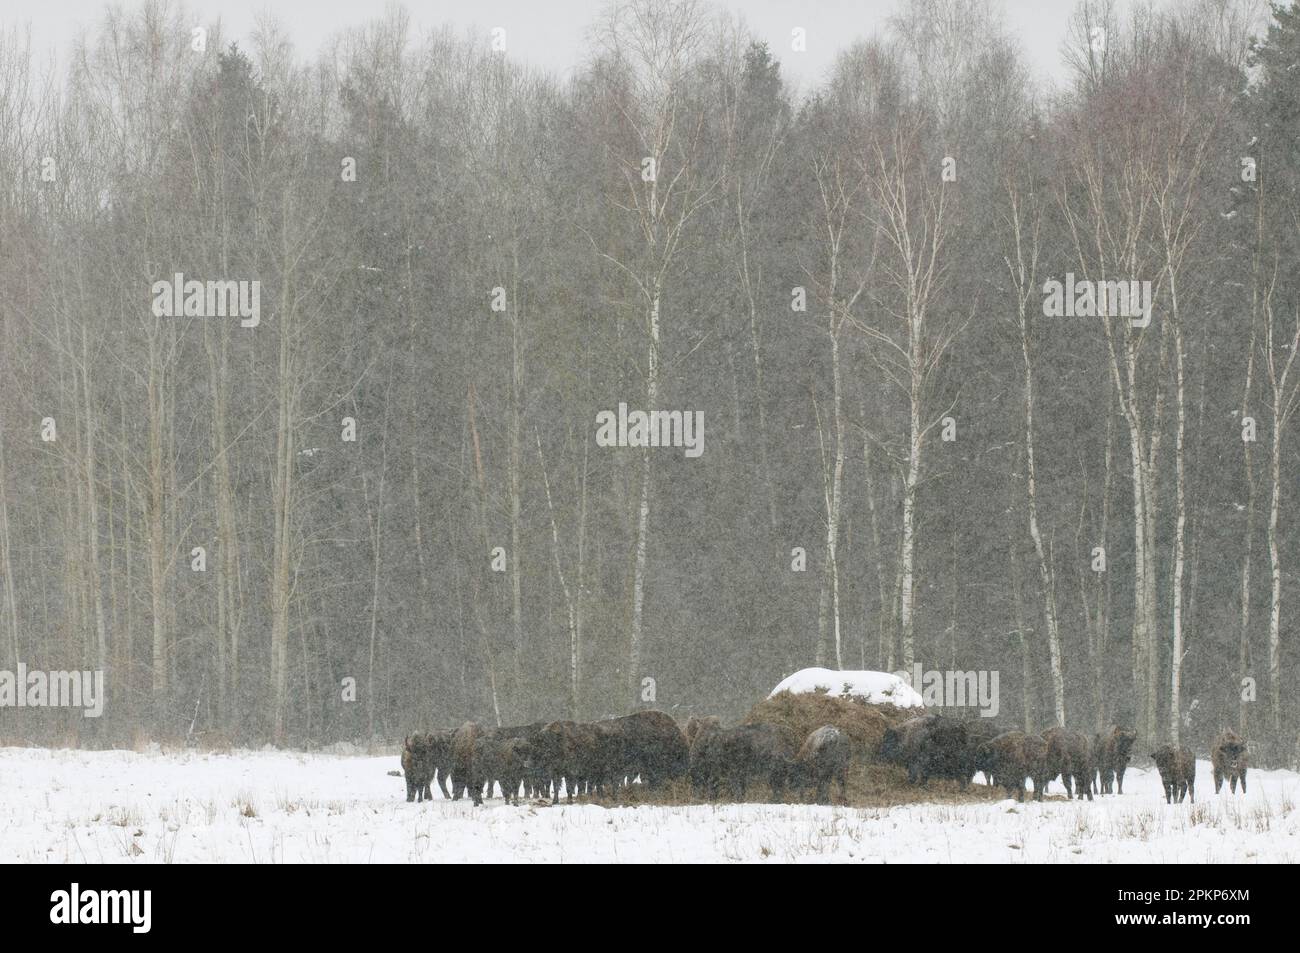 European bison (Bison bonasus), adult females and calves, herd gathered around feeding station on snow-covered meadow at the edge of forest habitat du Stock Photo